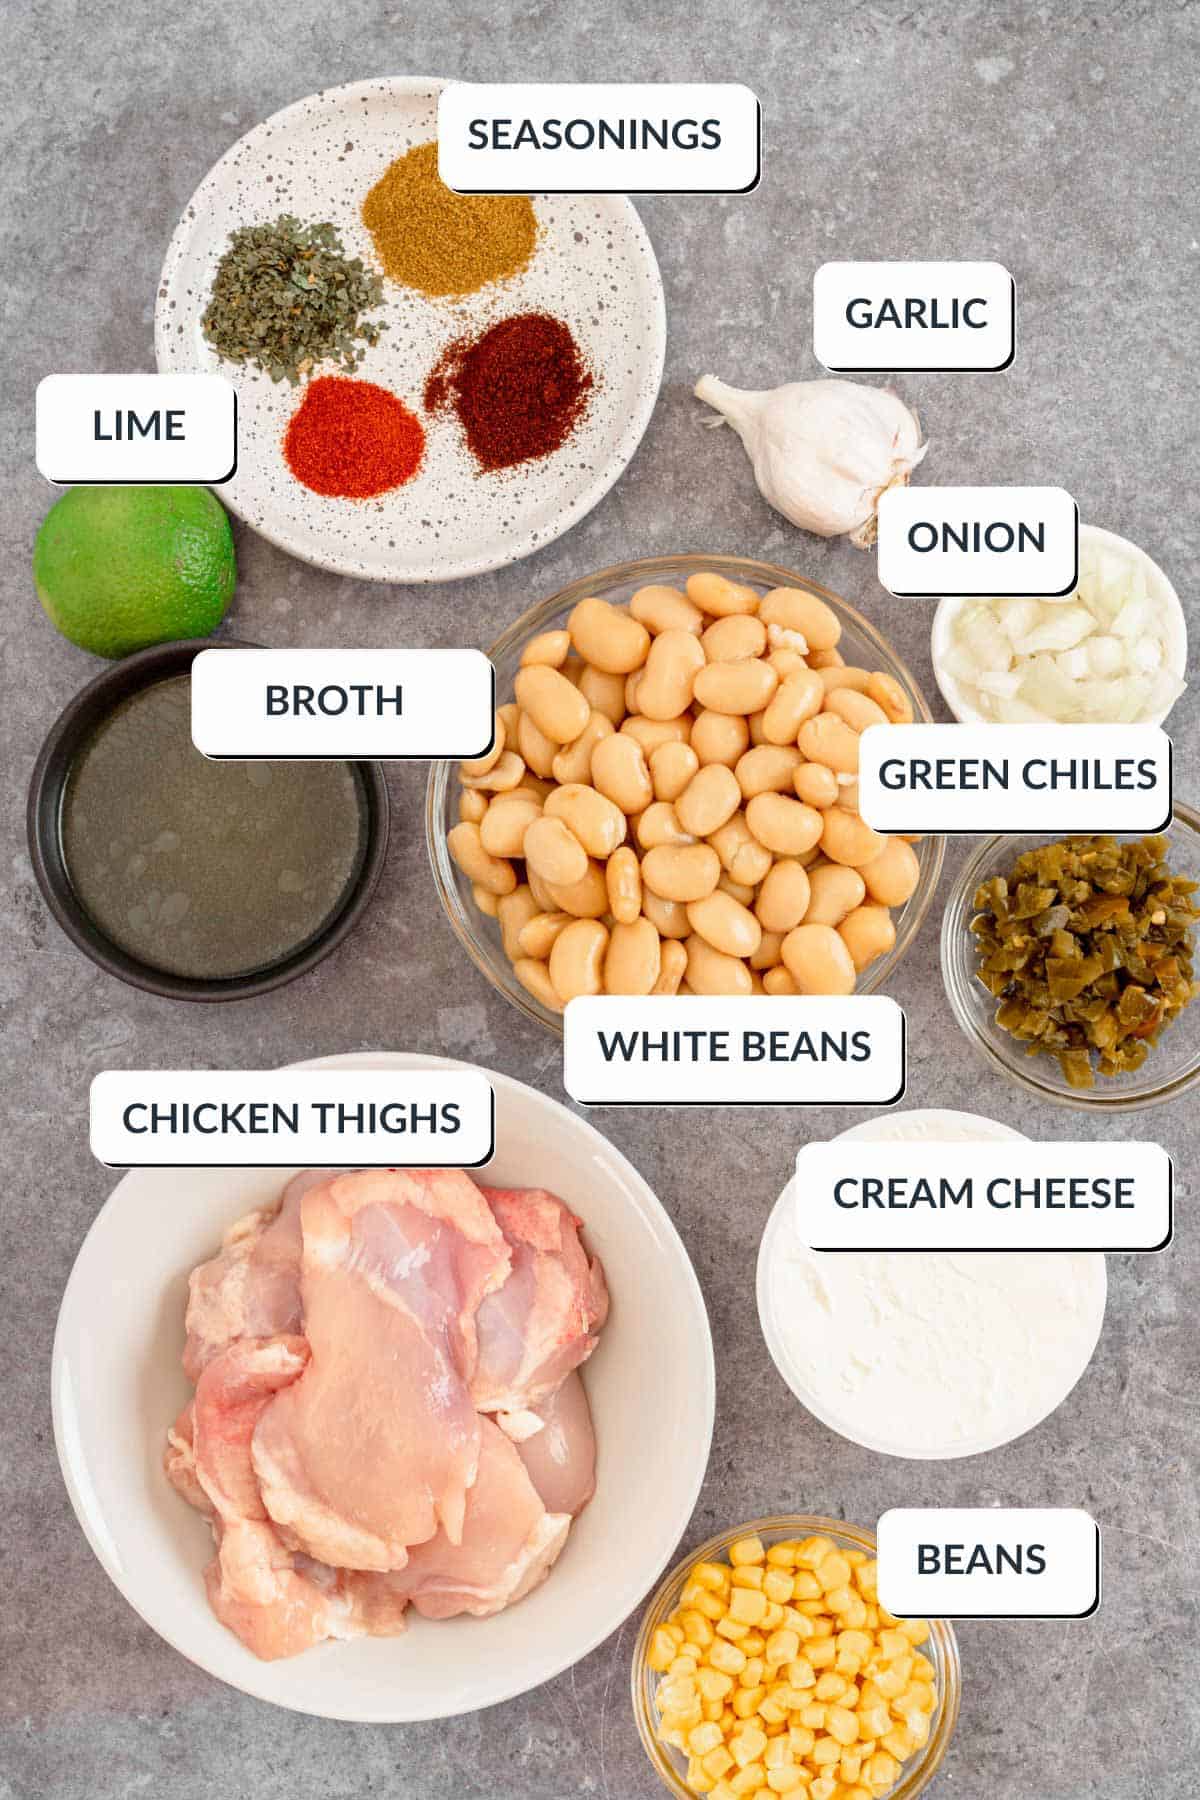 Ingredients for Crock Pot Chicken Chili Cream Cheese